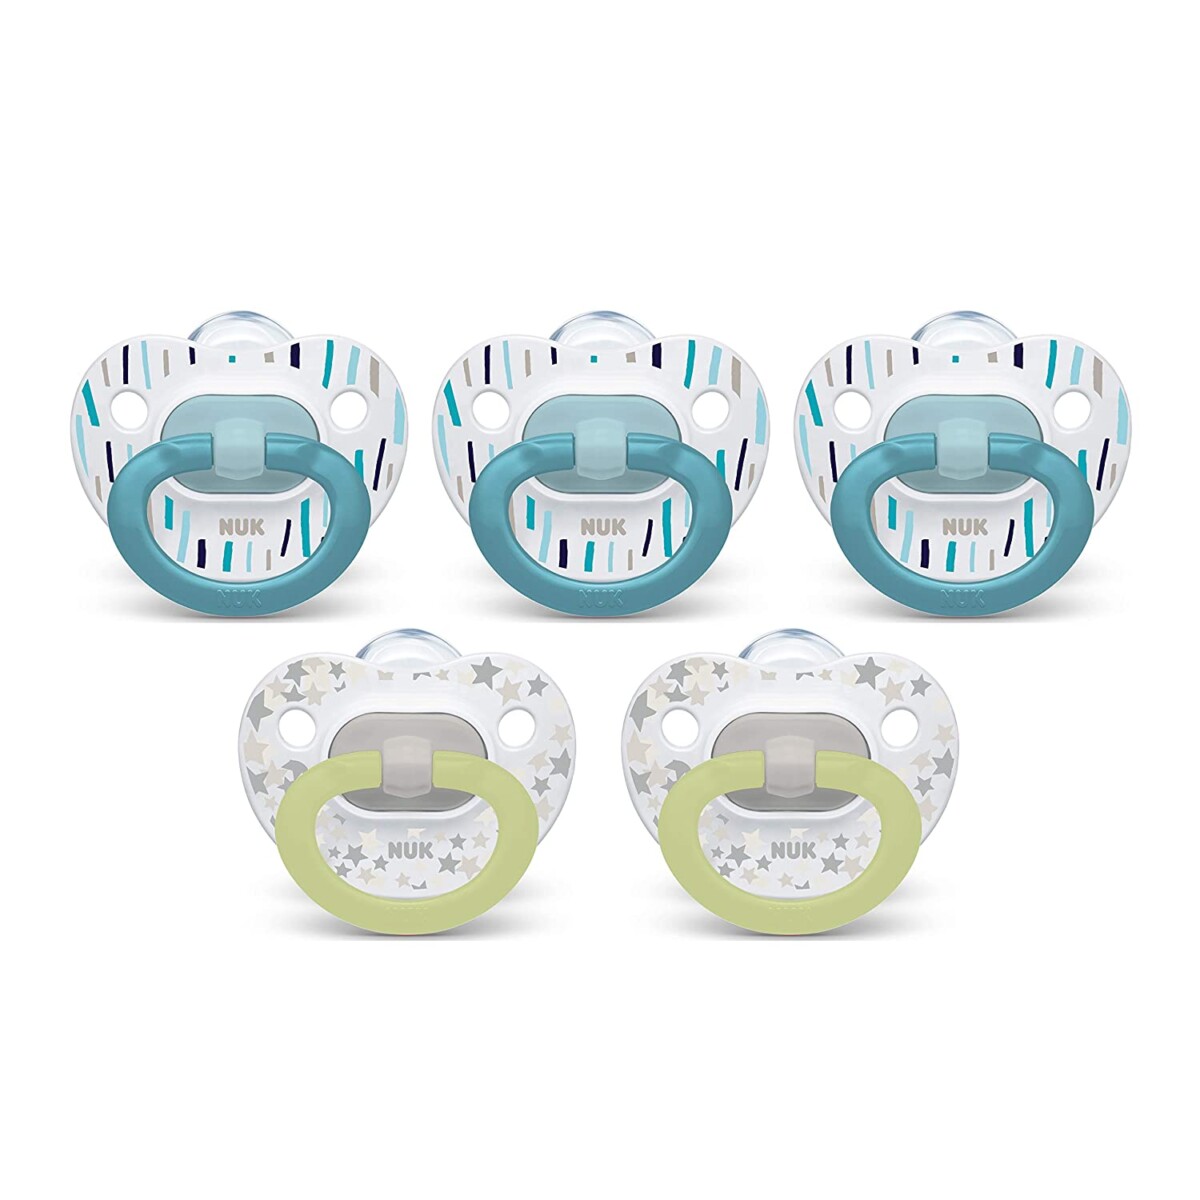 Alea's Deals NUK Orthodontic Pacifiers, 0-6 Months, 5-Pack Up to 60% Off! Was $9.99!  